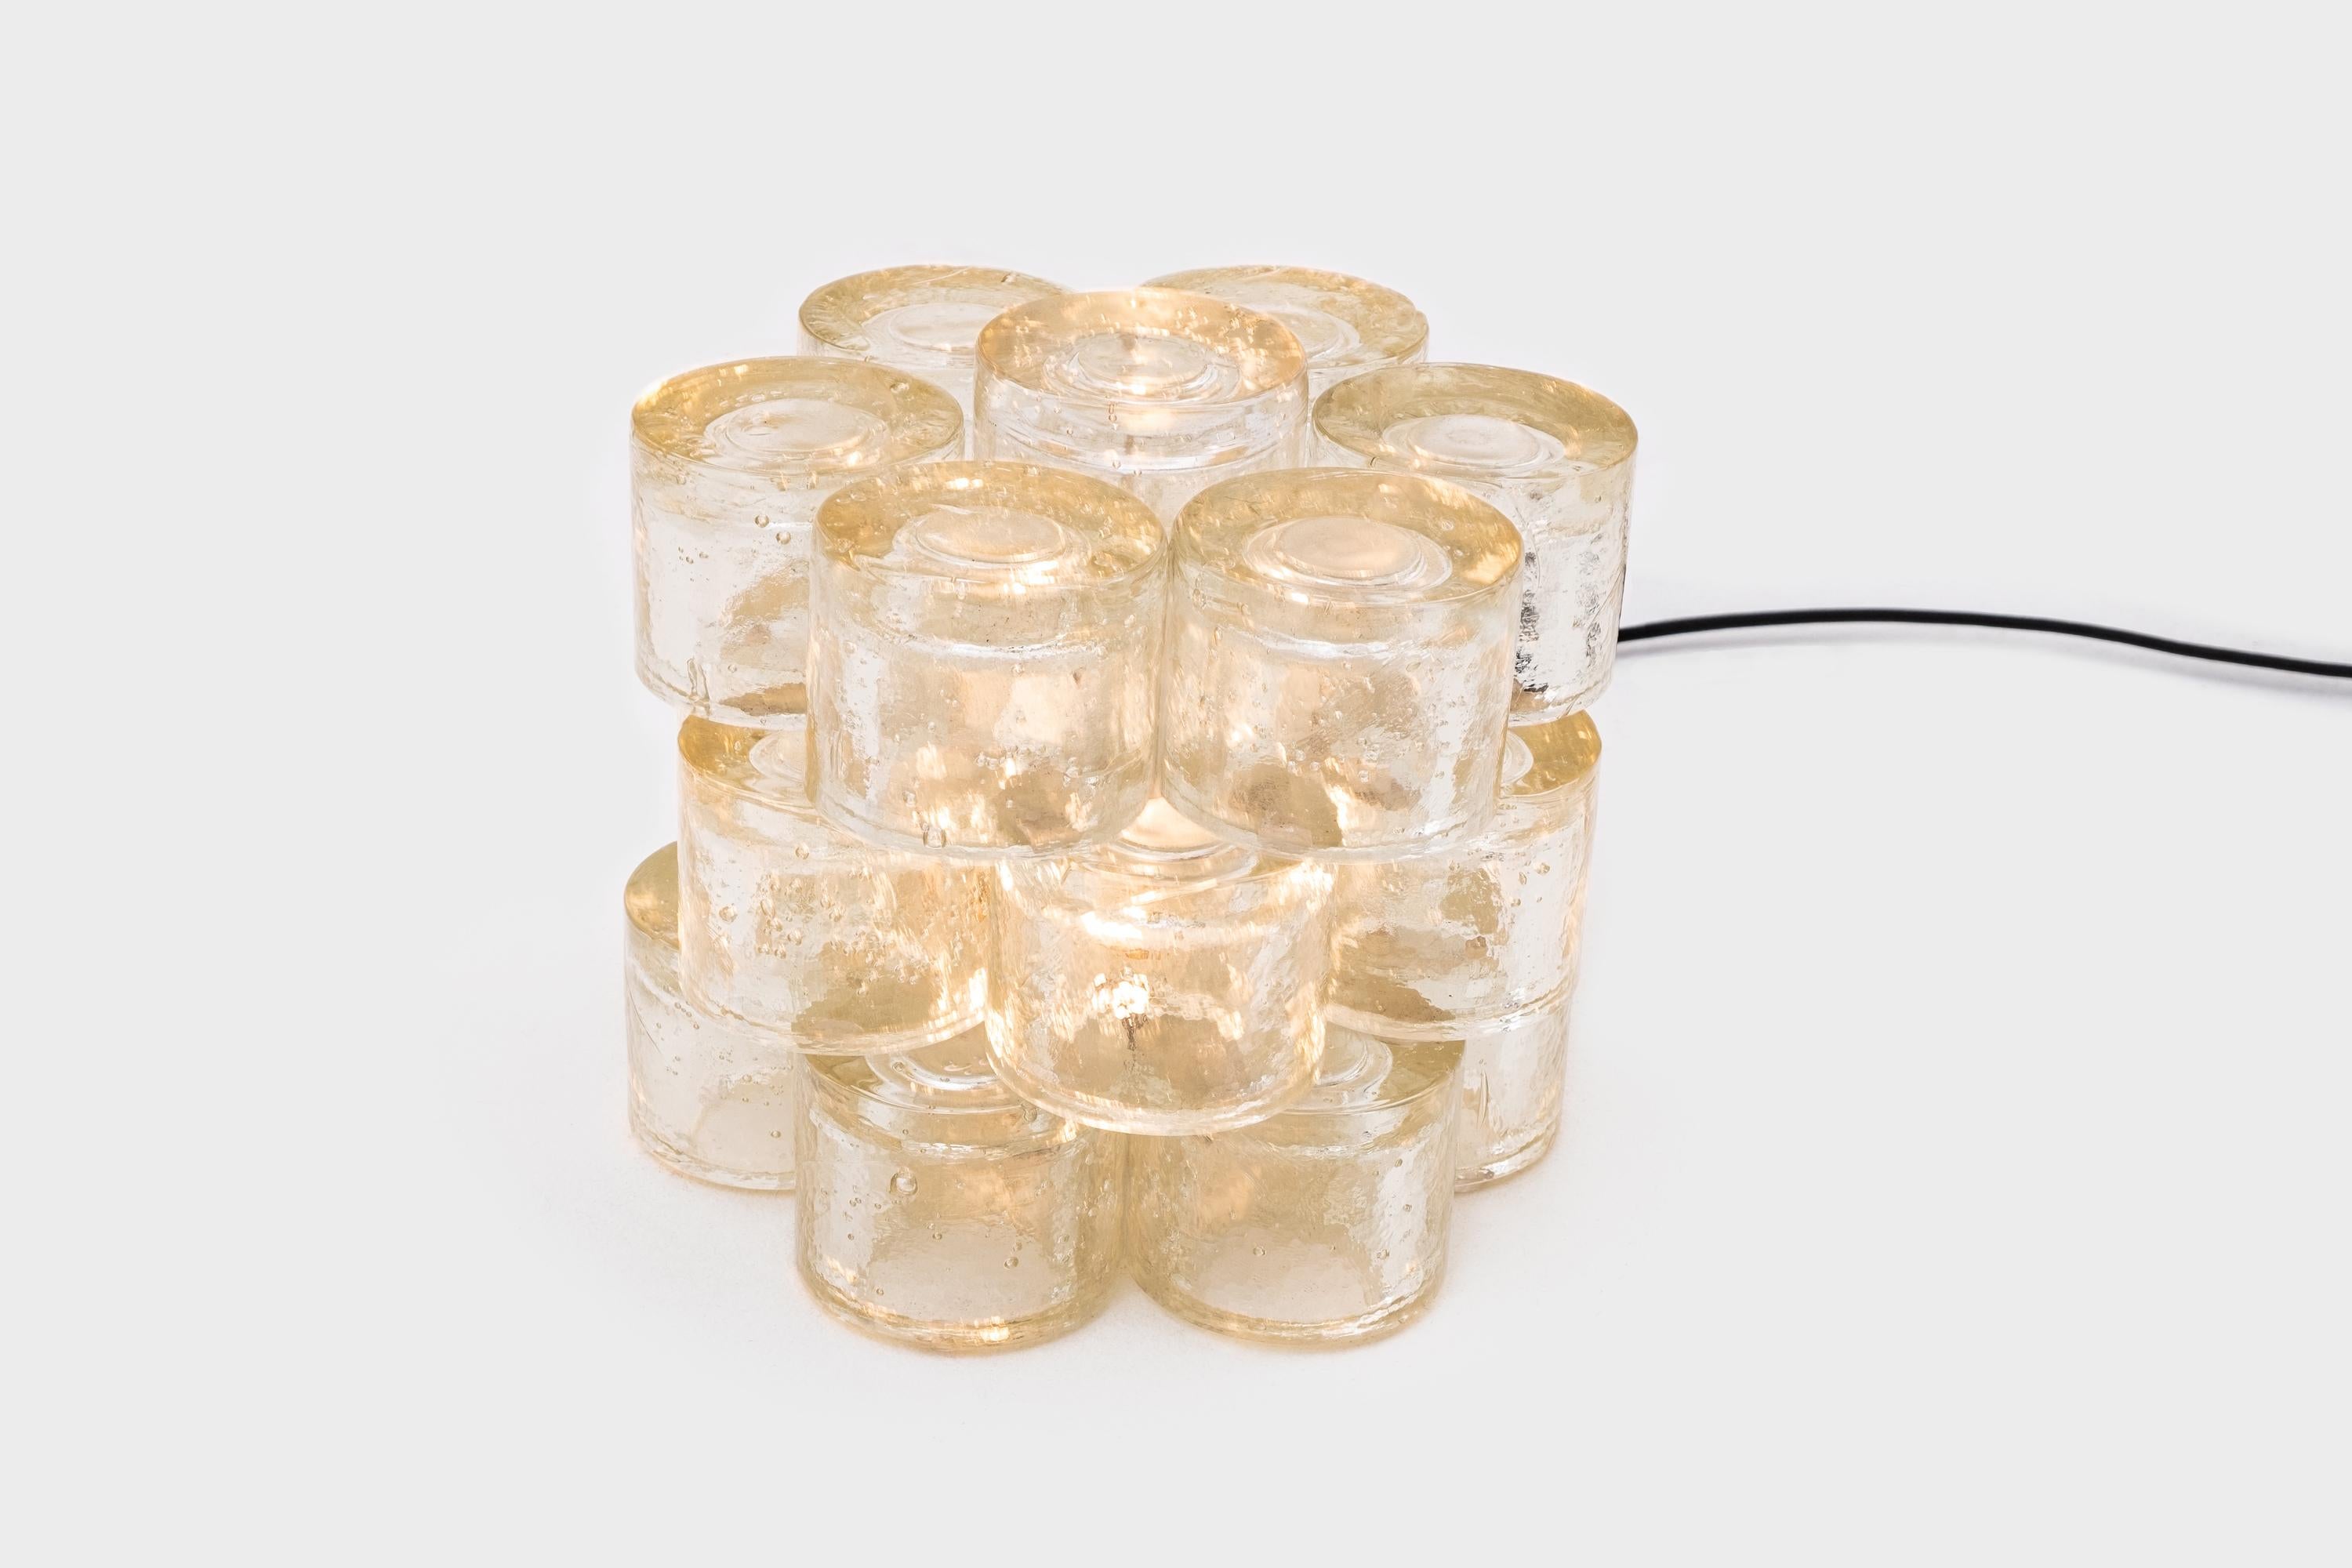 Exceptional table lamp by Poliarte, Italy, 1968. Big sculptural object made from heavy stacked Murano glass cylinders all handcrafted with each their own unique bubble pattern. Provided with one E27 light fitting for a balanced overall light, lamp